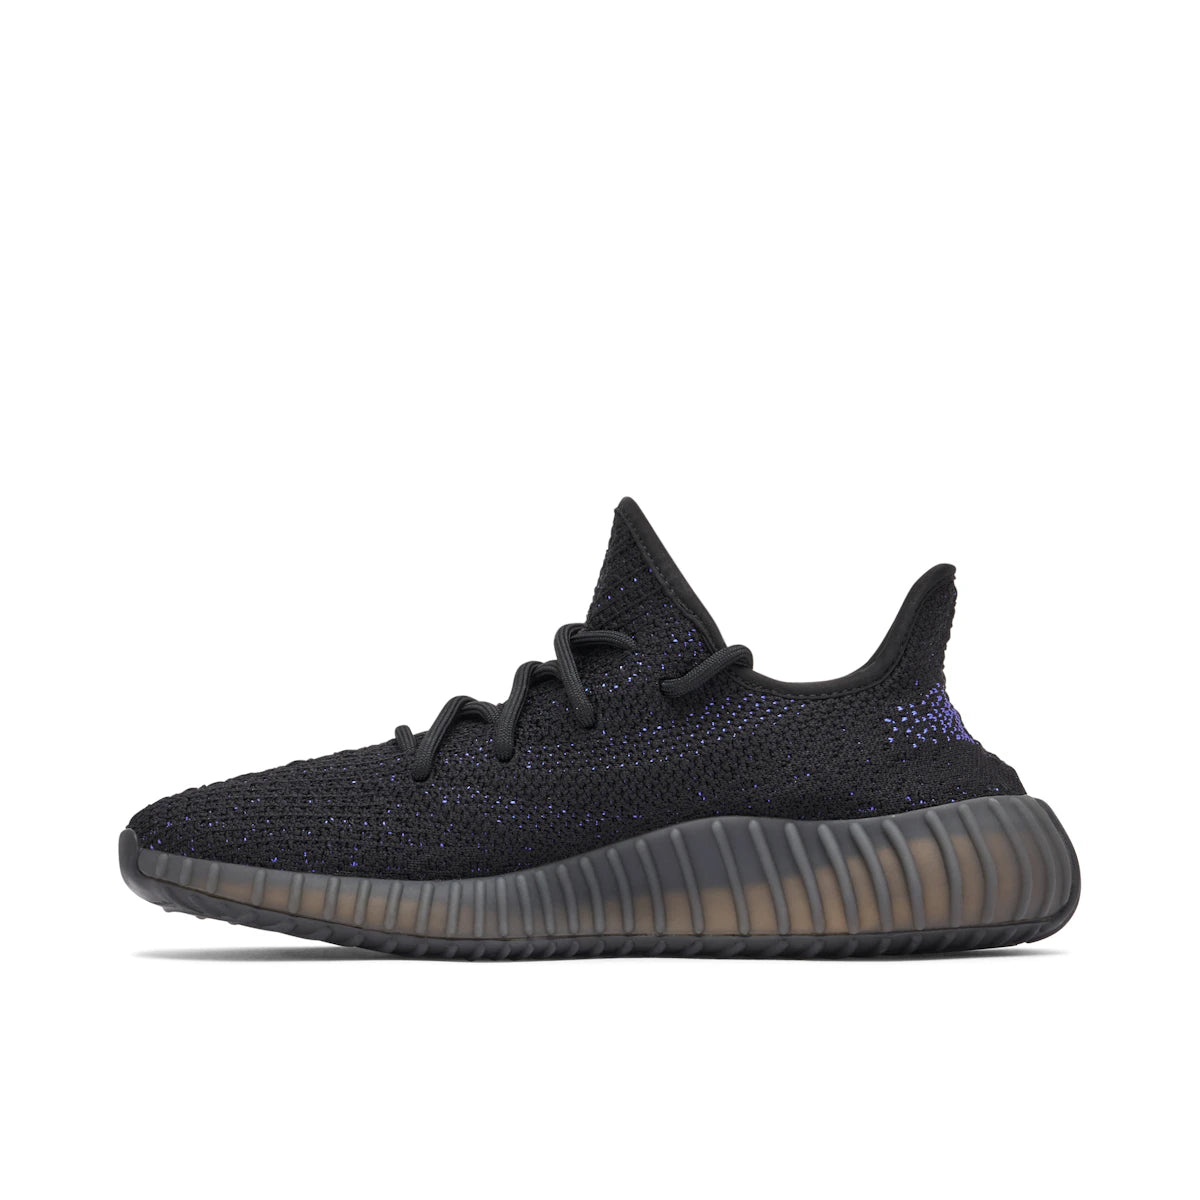 Adidas Yeezy Boost 350 V2 Dazzling Blue by Yeezy from £375.00